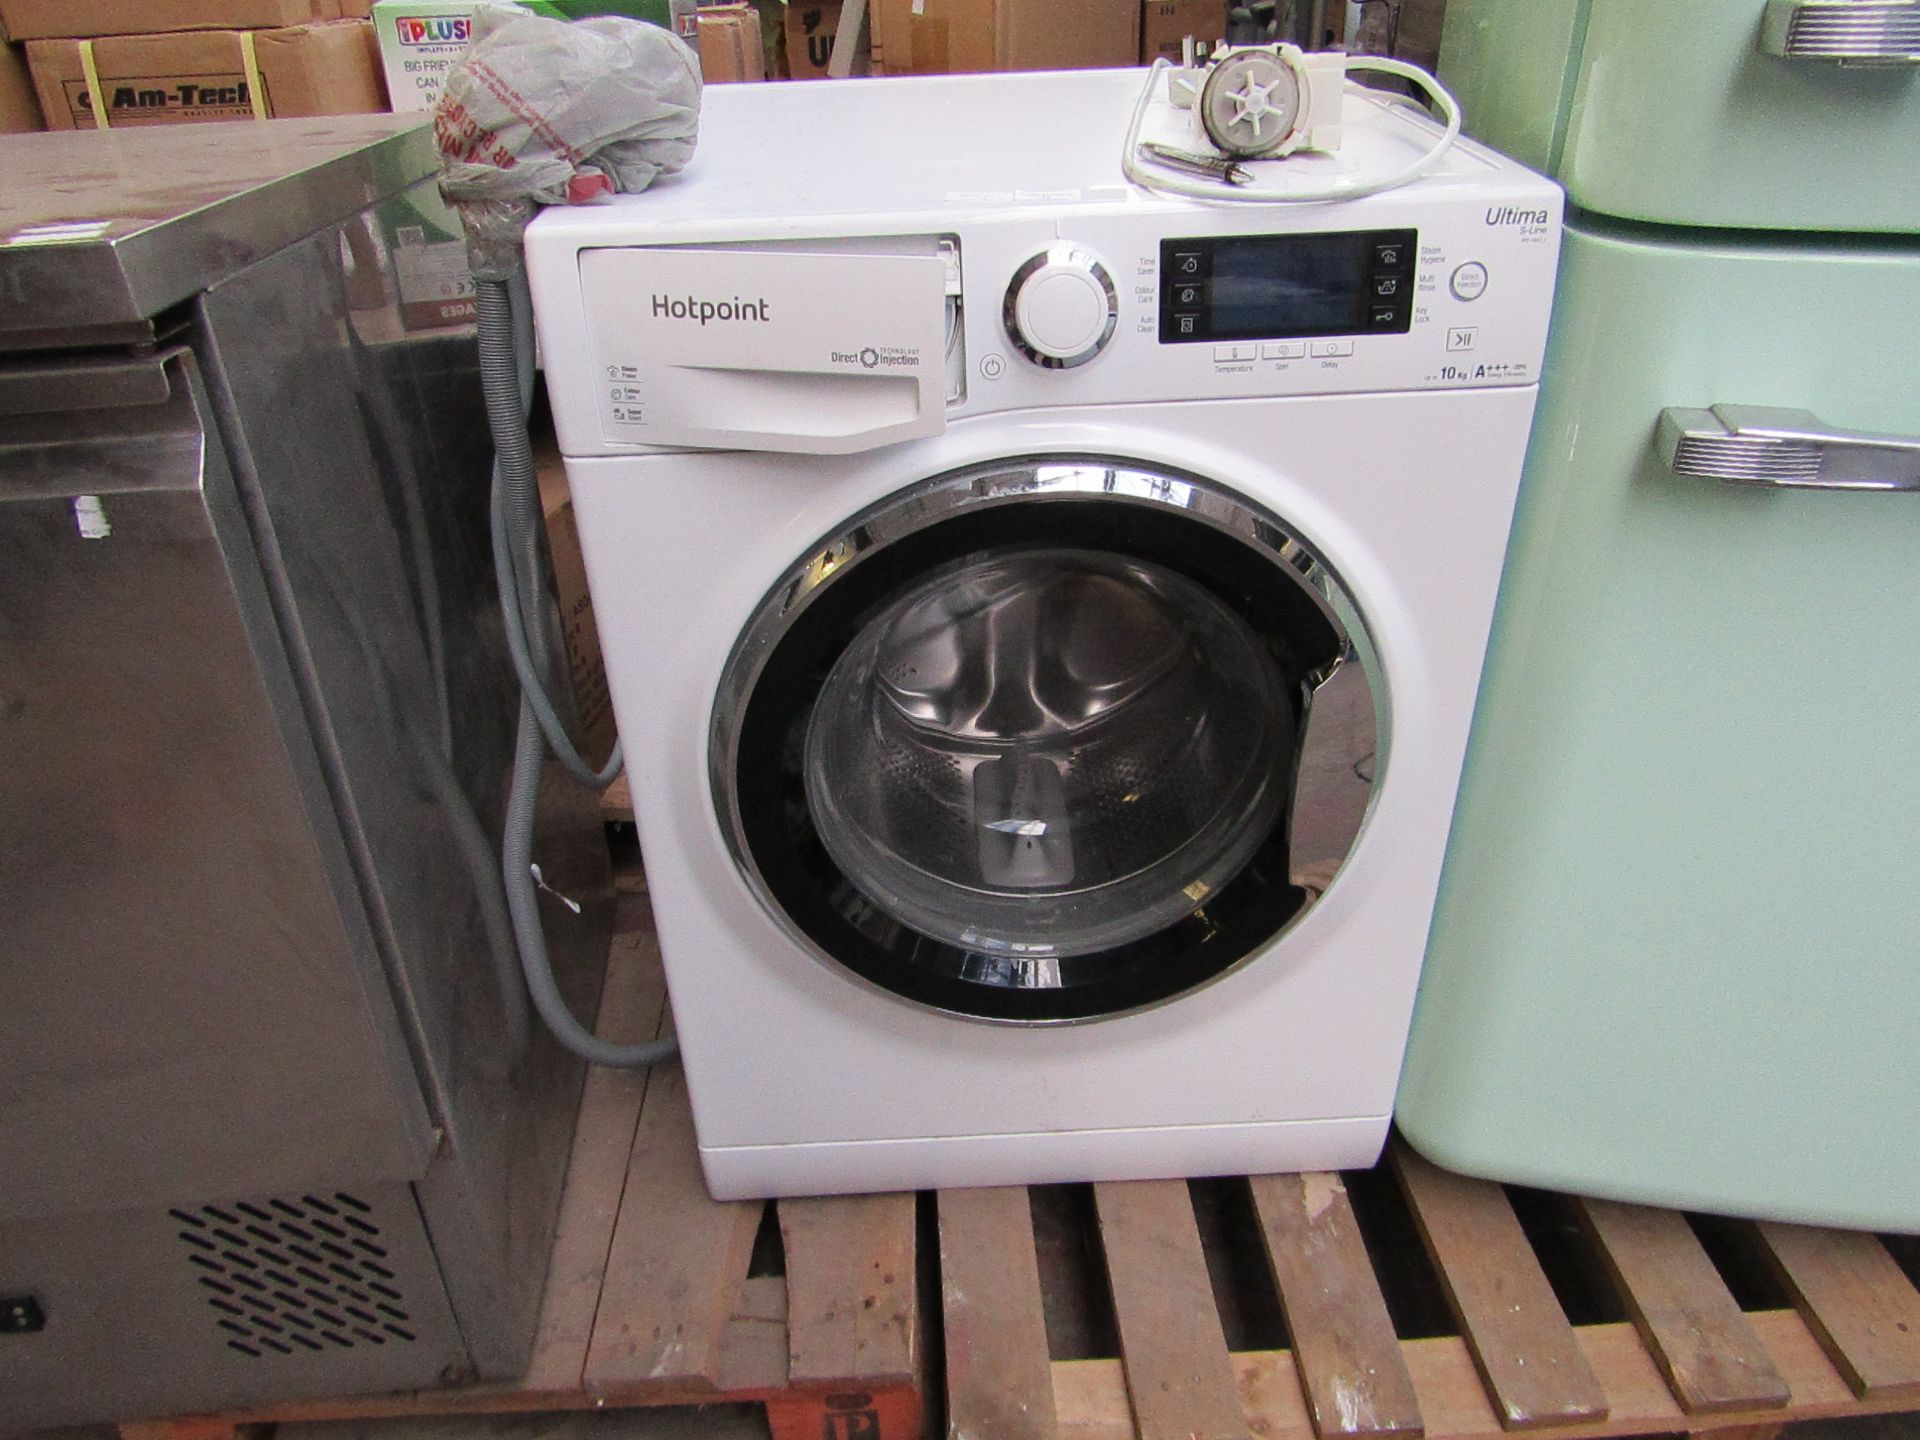 Hotpoint Ultima s-line 10kg washing machine.No Major damage but Drawer front unclipped.powers on